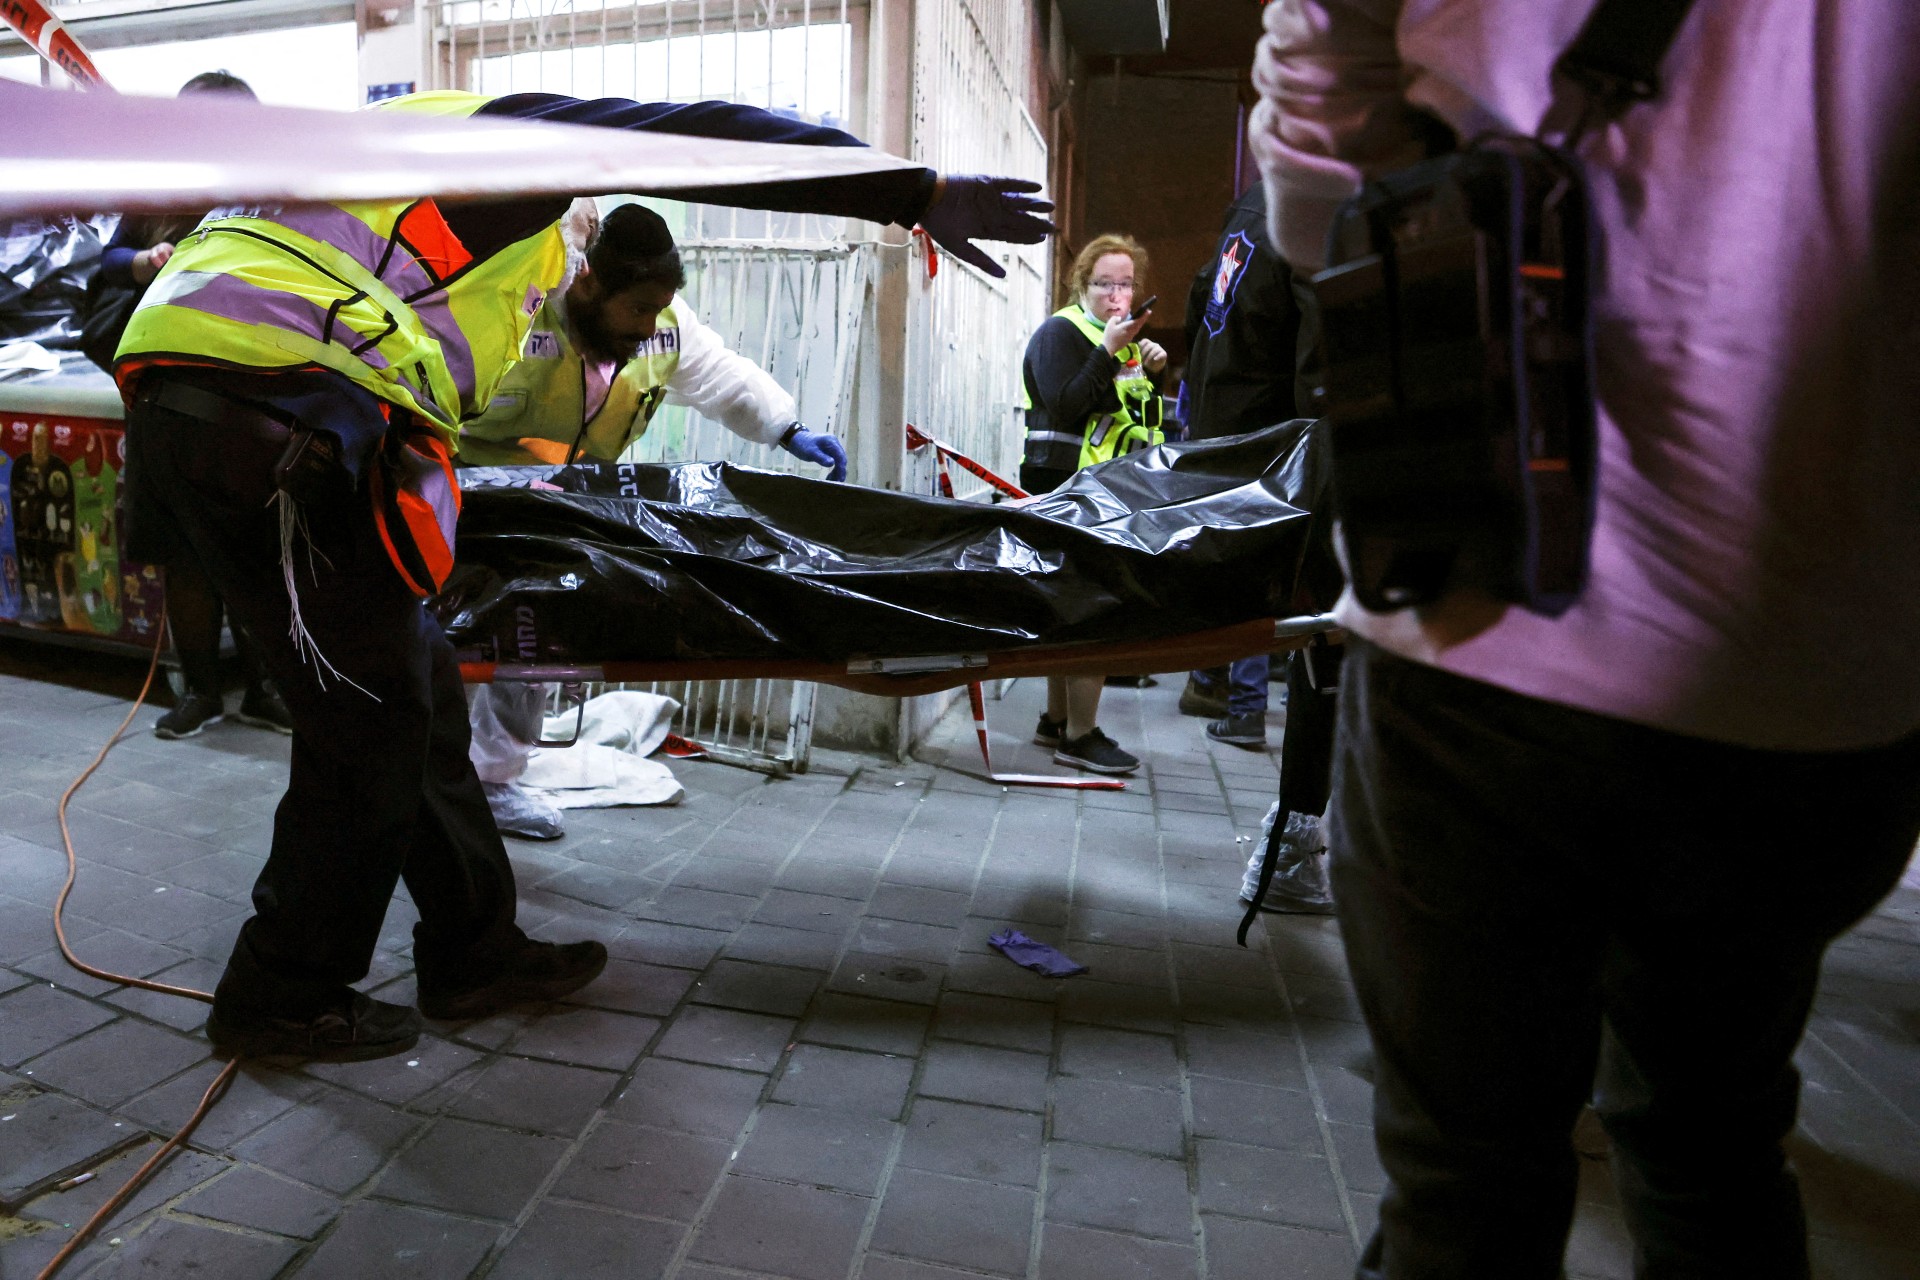 Israeli medical personnel and rescue workers evacuate a body from the scene of a fatal shooting attack on a street in Bnei Brak (Reuters)